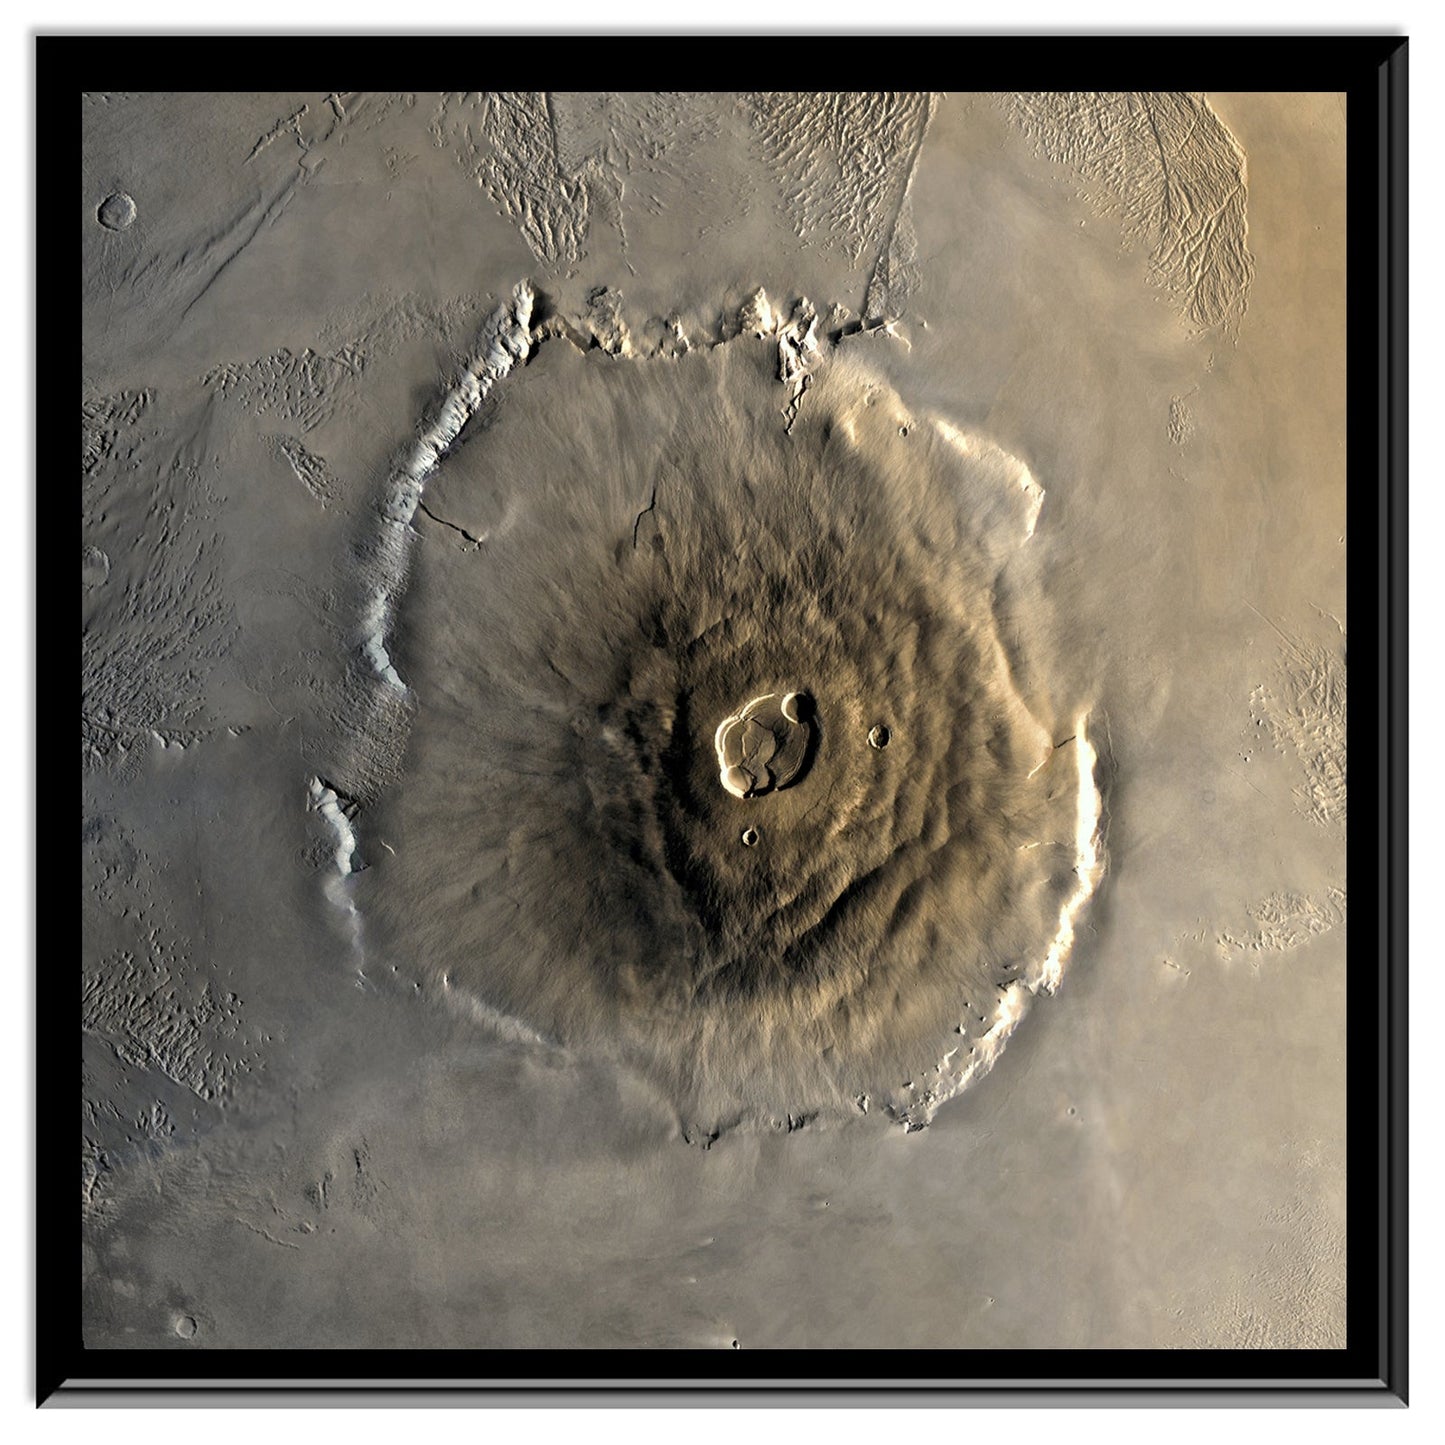 Largest Mountain of Mars - Olympus Mons